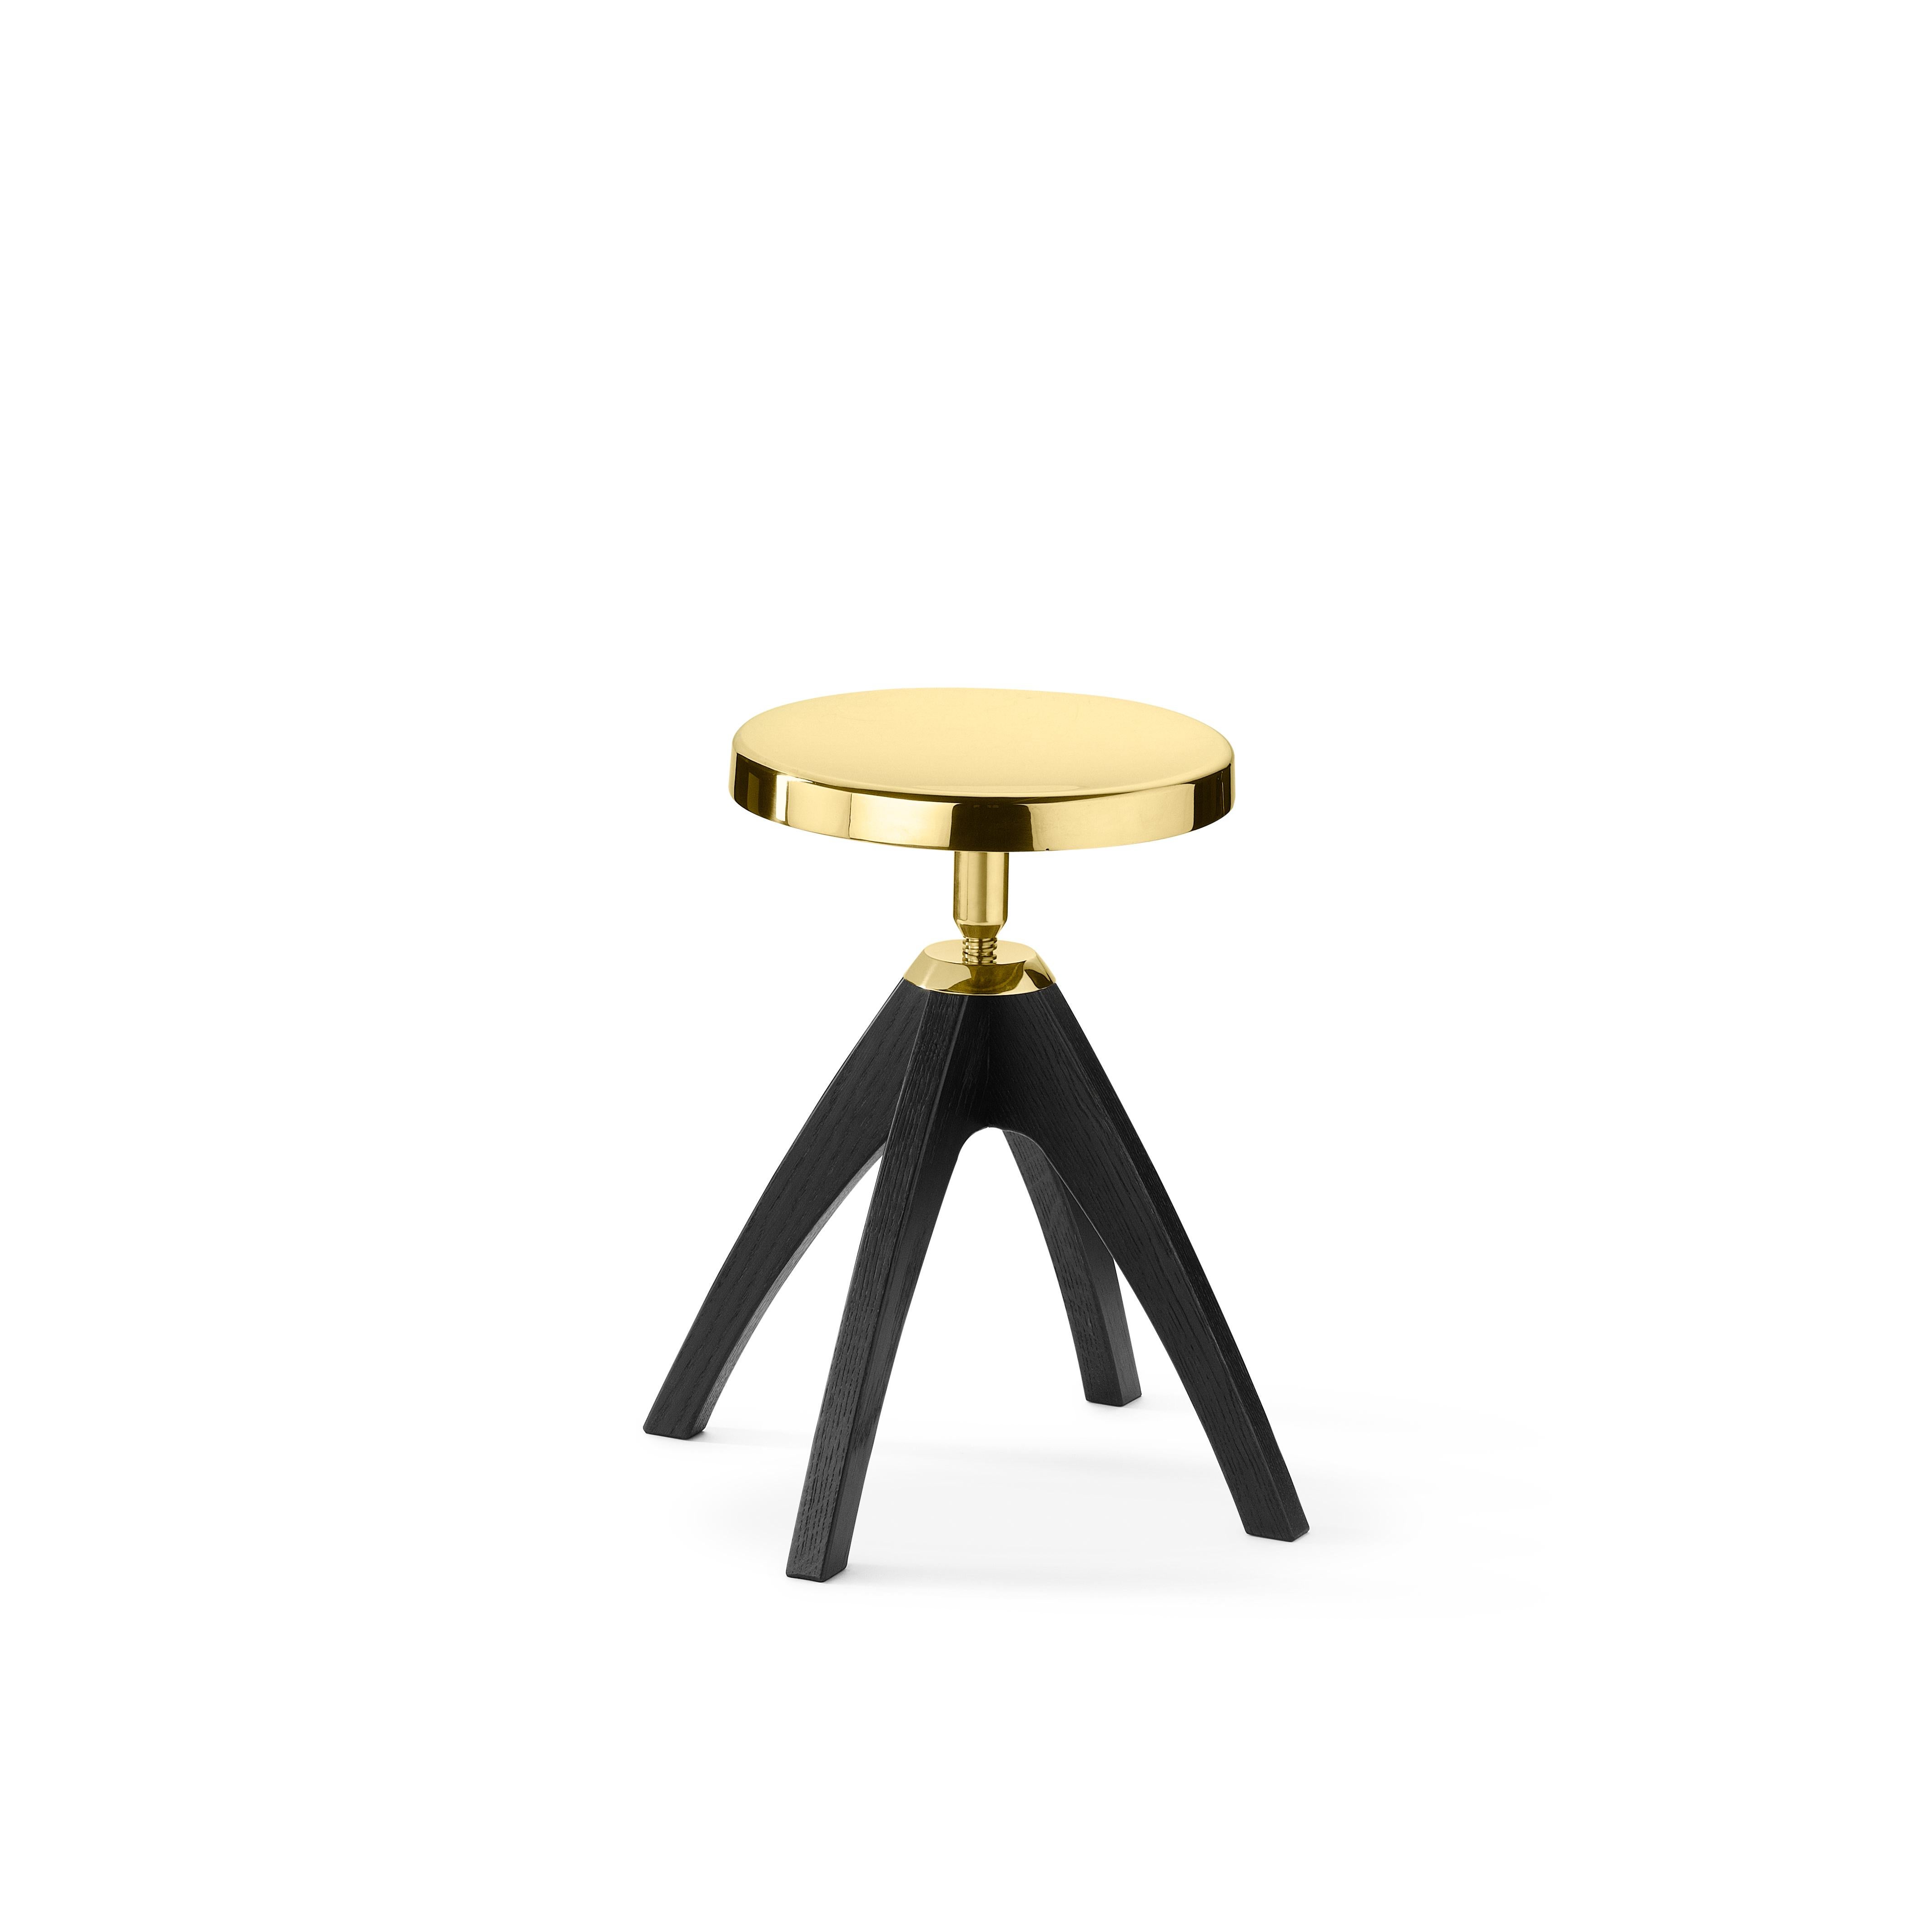 Stool in brass and dark durmast.
The height-adjustable stool, subject of which you can appreciate the adaptability with a gesture, in different contexts and users, becomes a precious object, with light or dark oak legs slightly bent and round seat